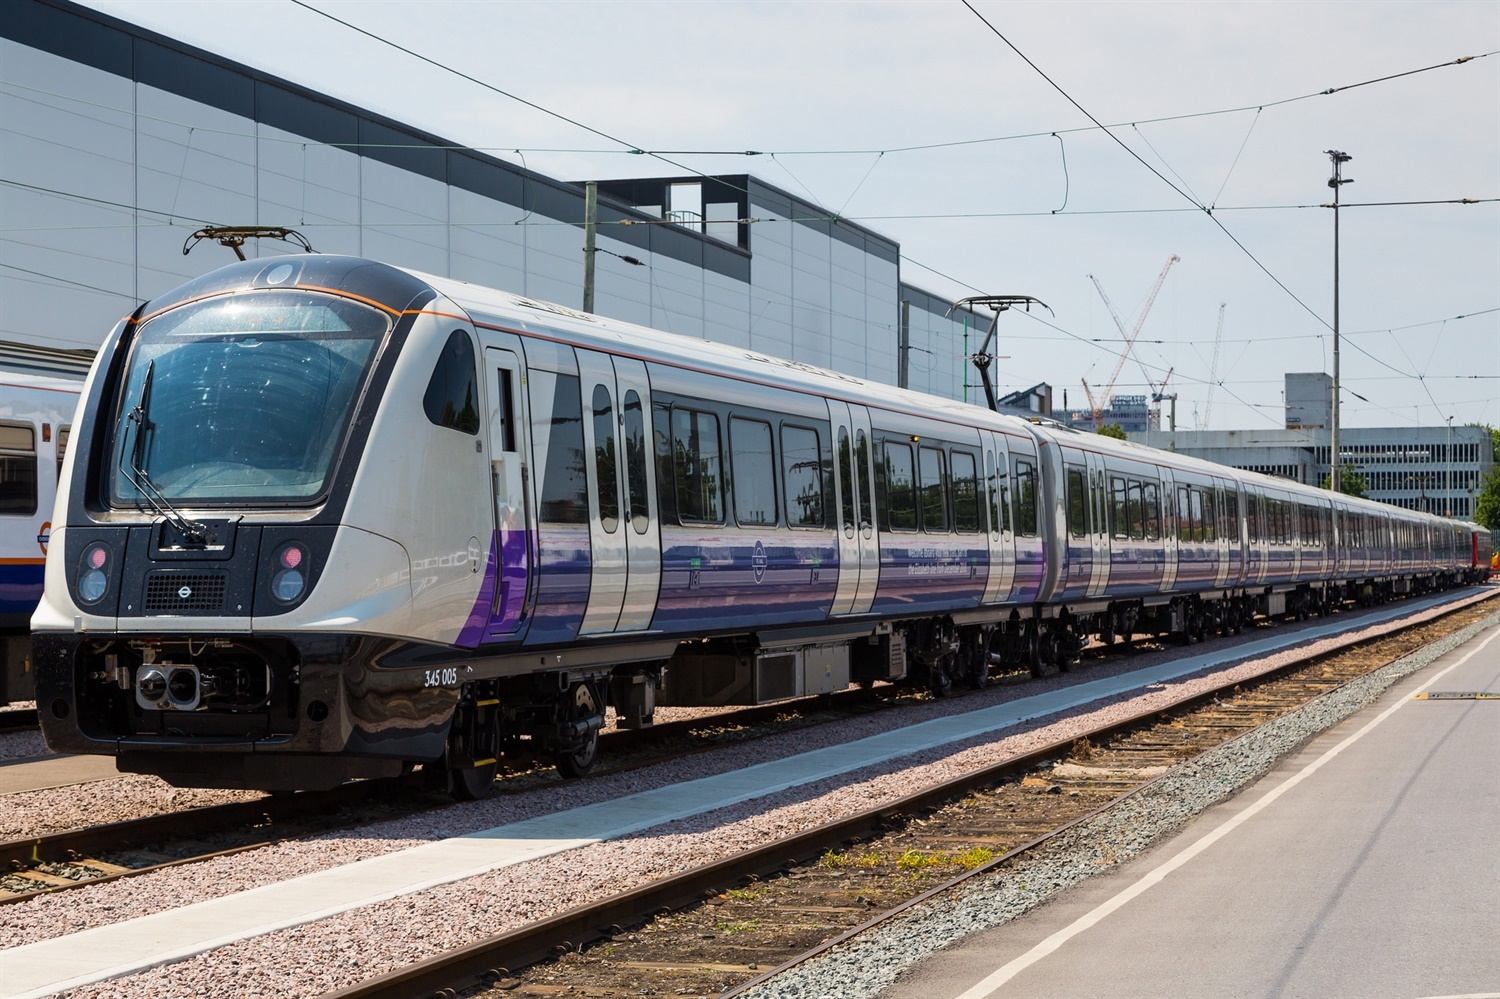 Elizabeth Line trains first to run without yellow front ends since steam era